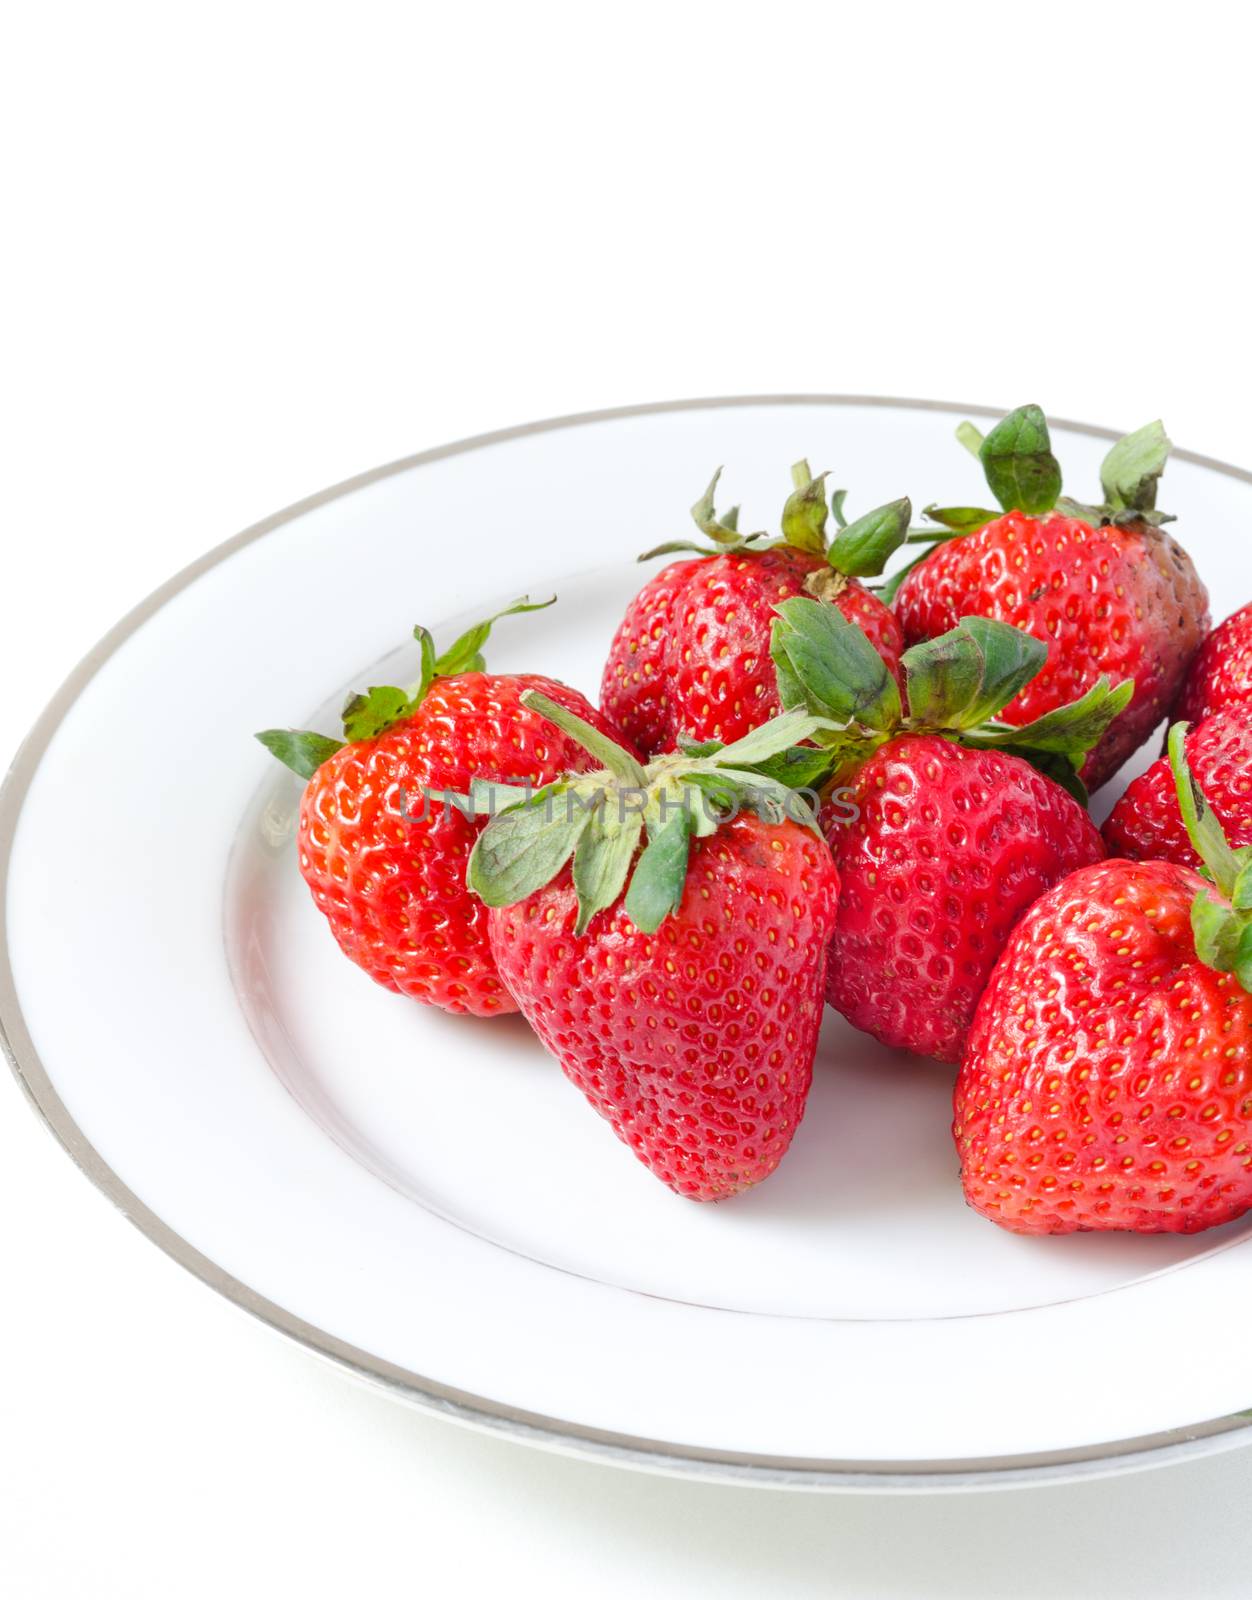 Ripe strawberries in a porcelain plate on white background